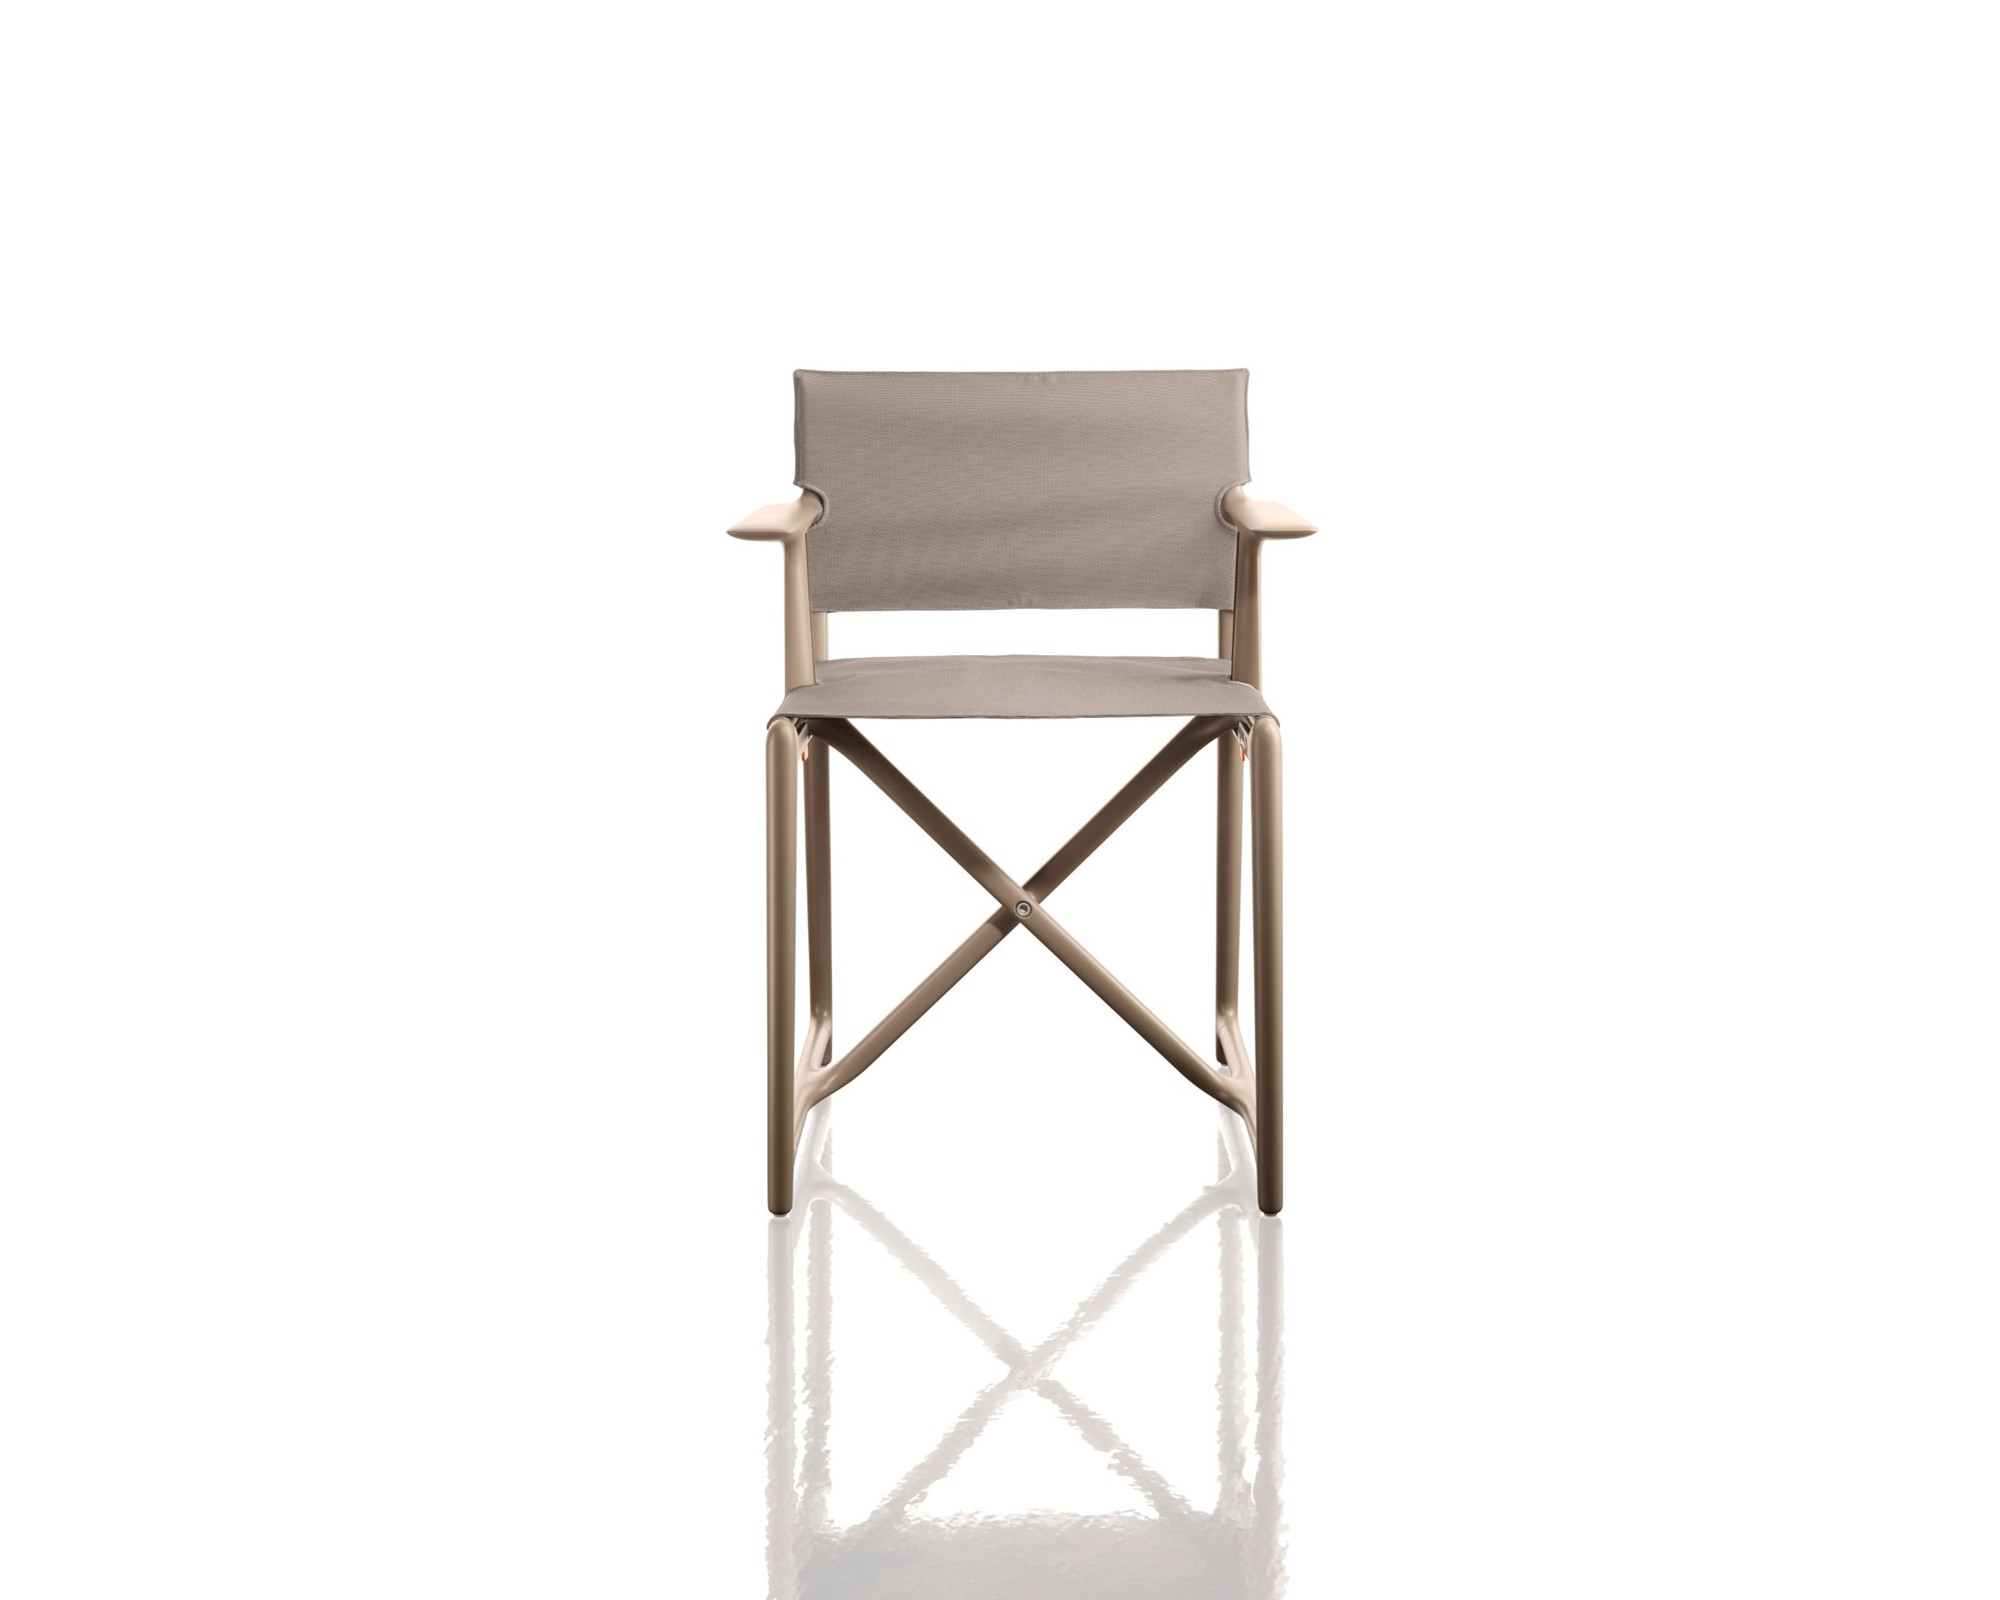 Stanley Dining Chair